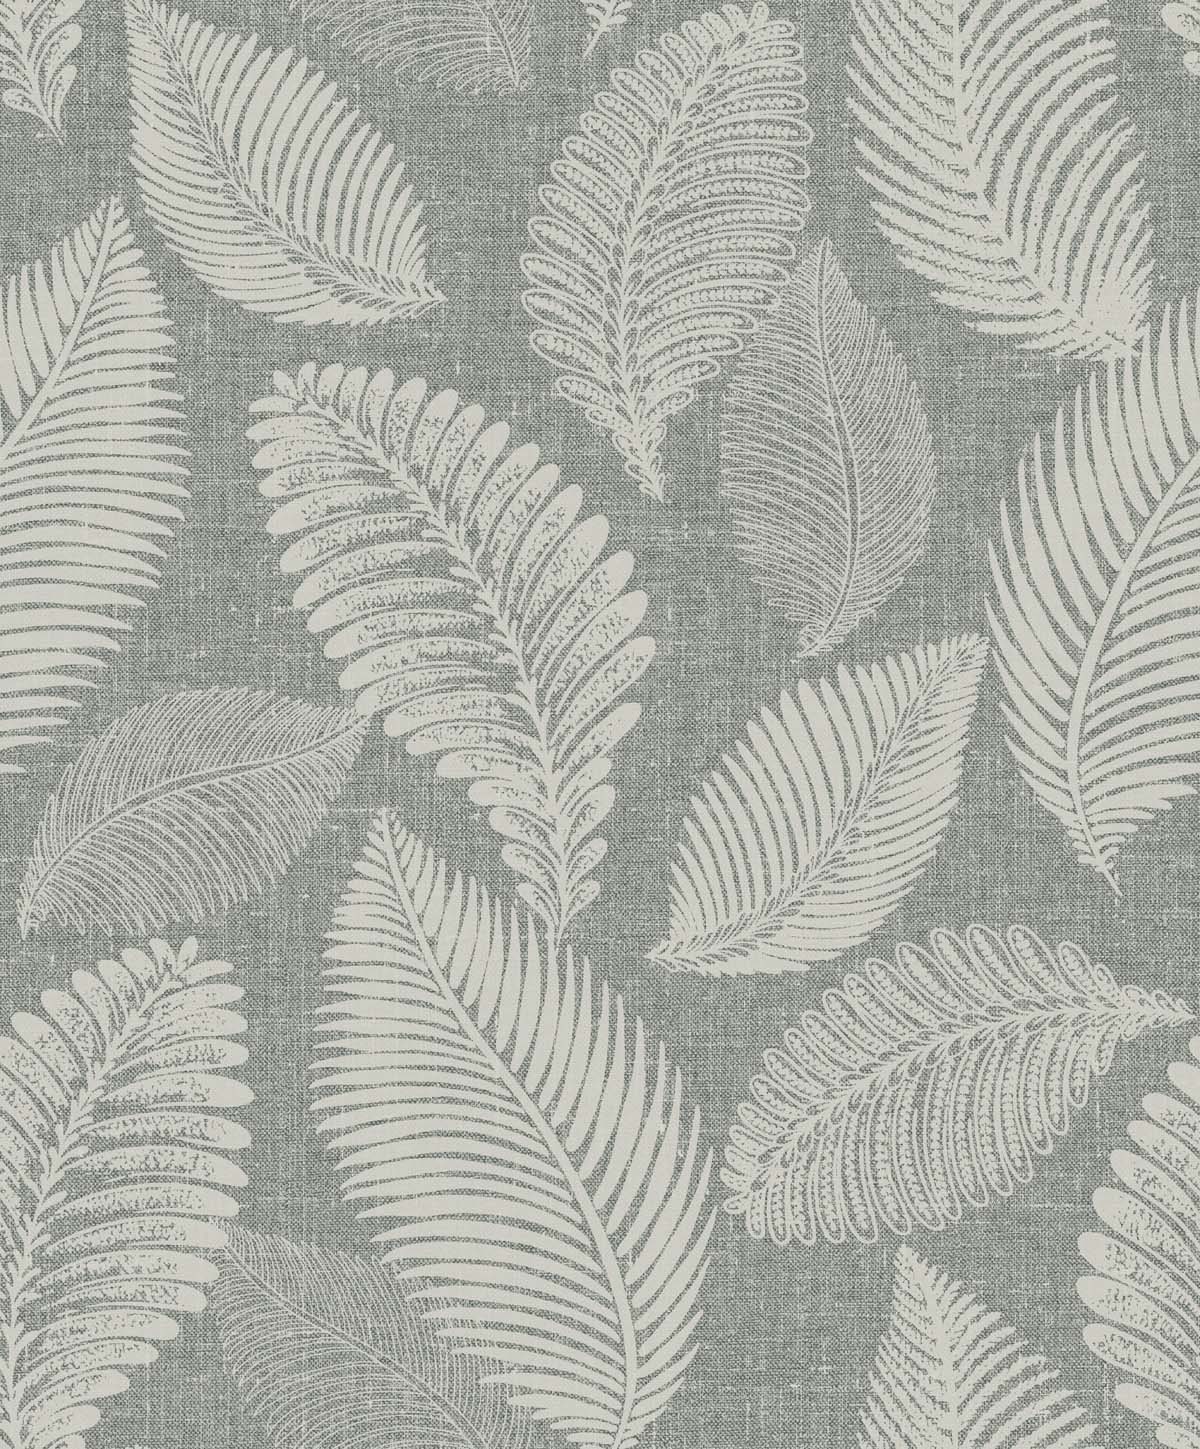 Seabrook Designs EW10010 White Heron Tossed Leaves  Wallpaper Charcoal Linen